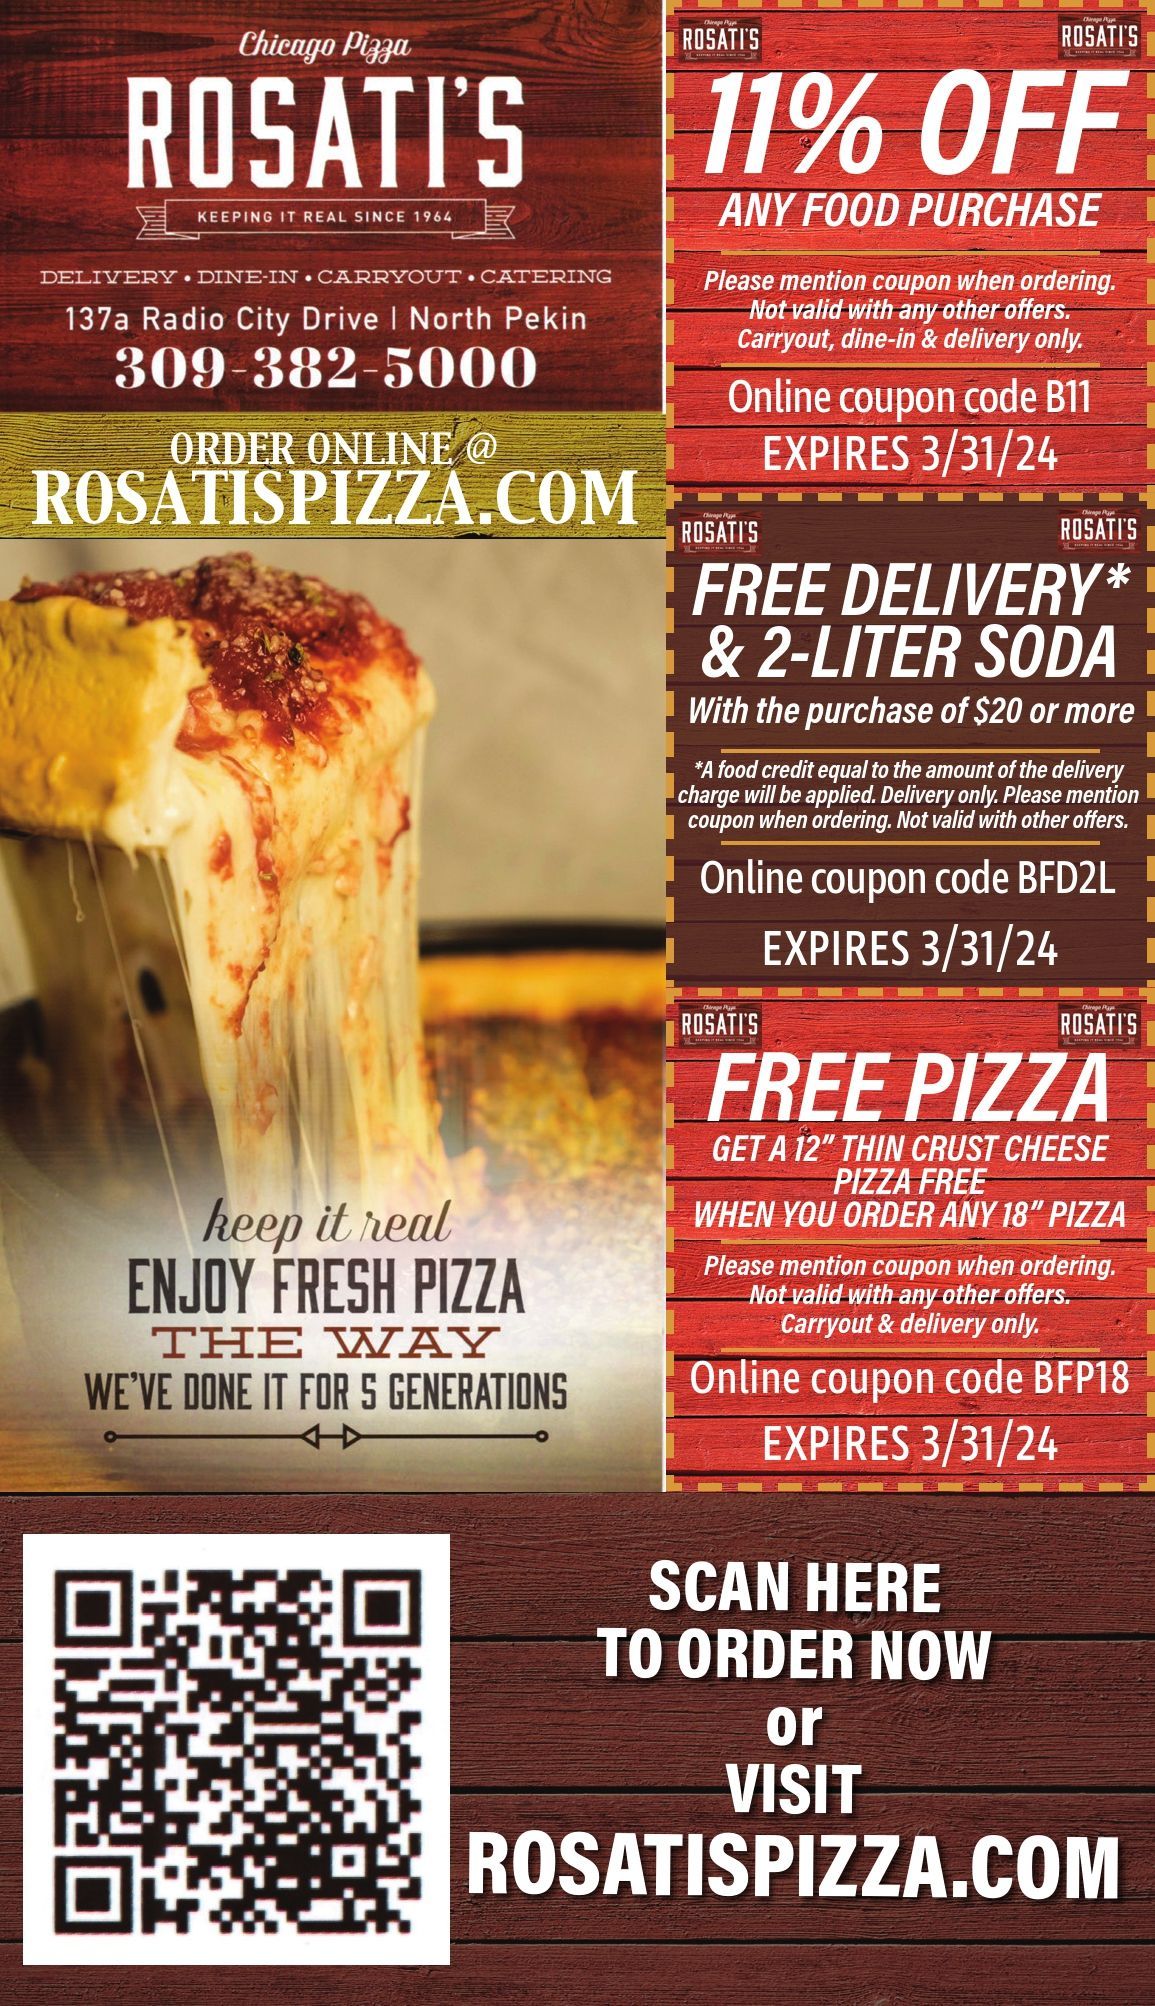 Rosati's Pizza chicago style, delivery, dine-in, carryout and catering 11% off, free delivery and free pizza coupons, North Pekin, IL